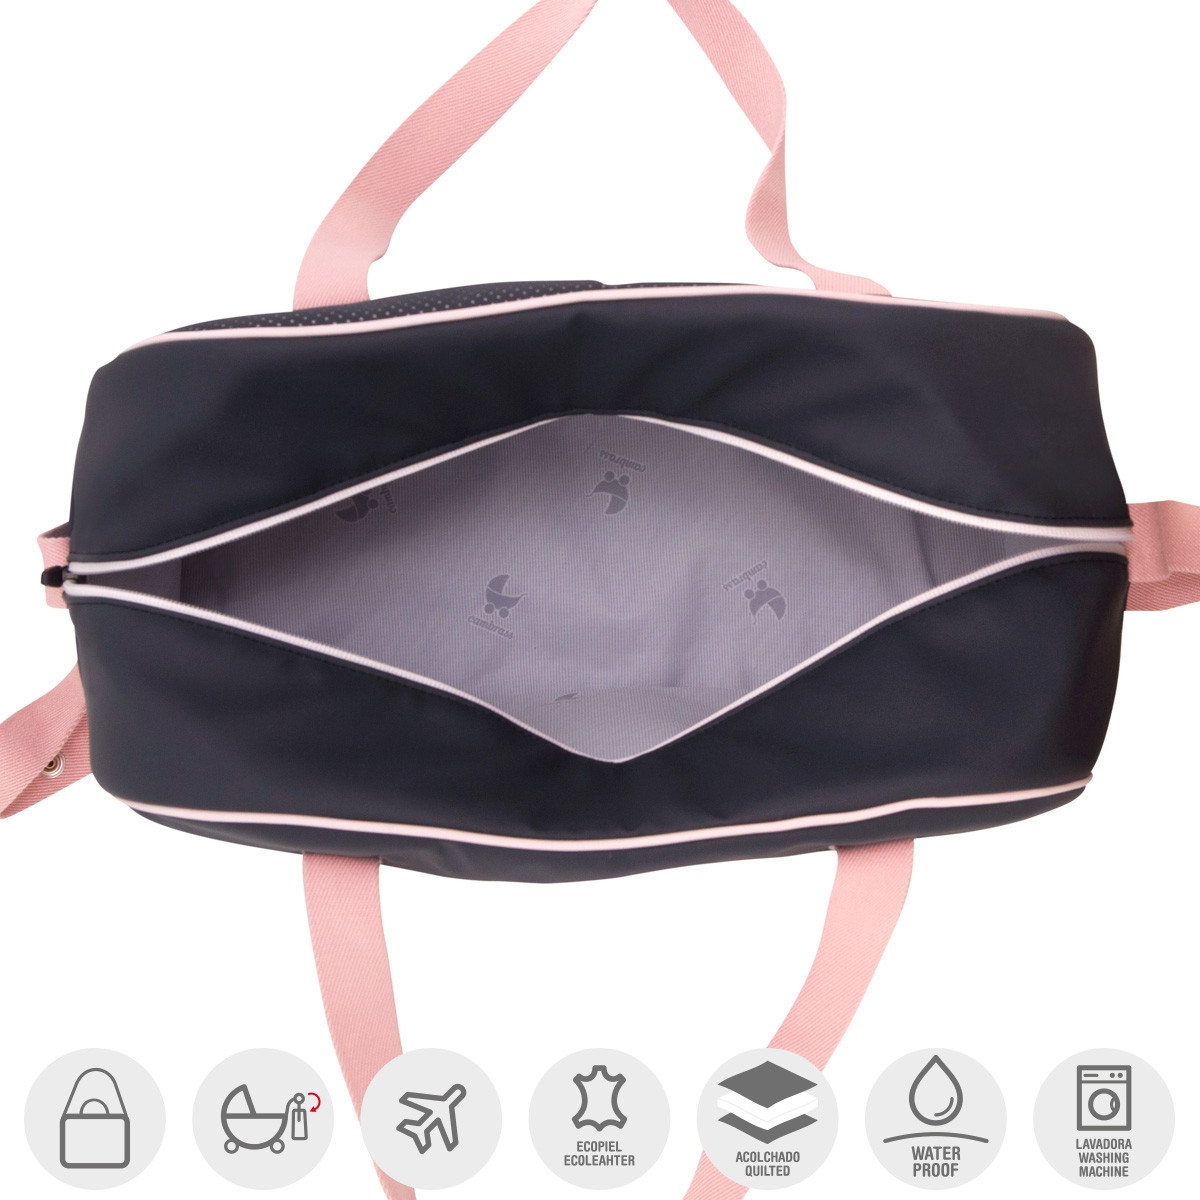 MATERNITY BAG PROME URBANY PINK 18x44x33 CM CAMBRASS - 2